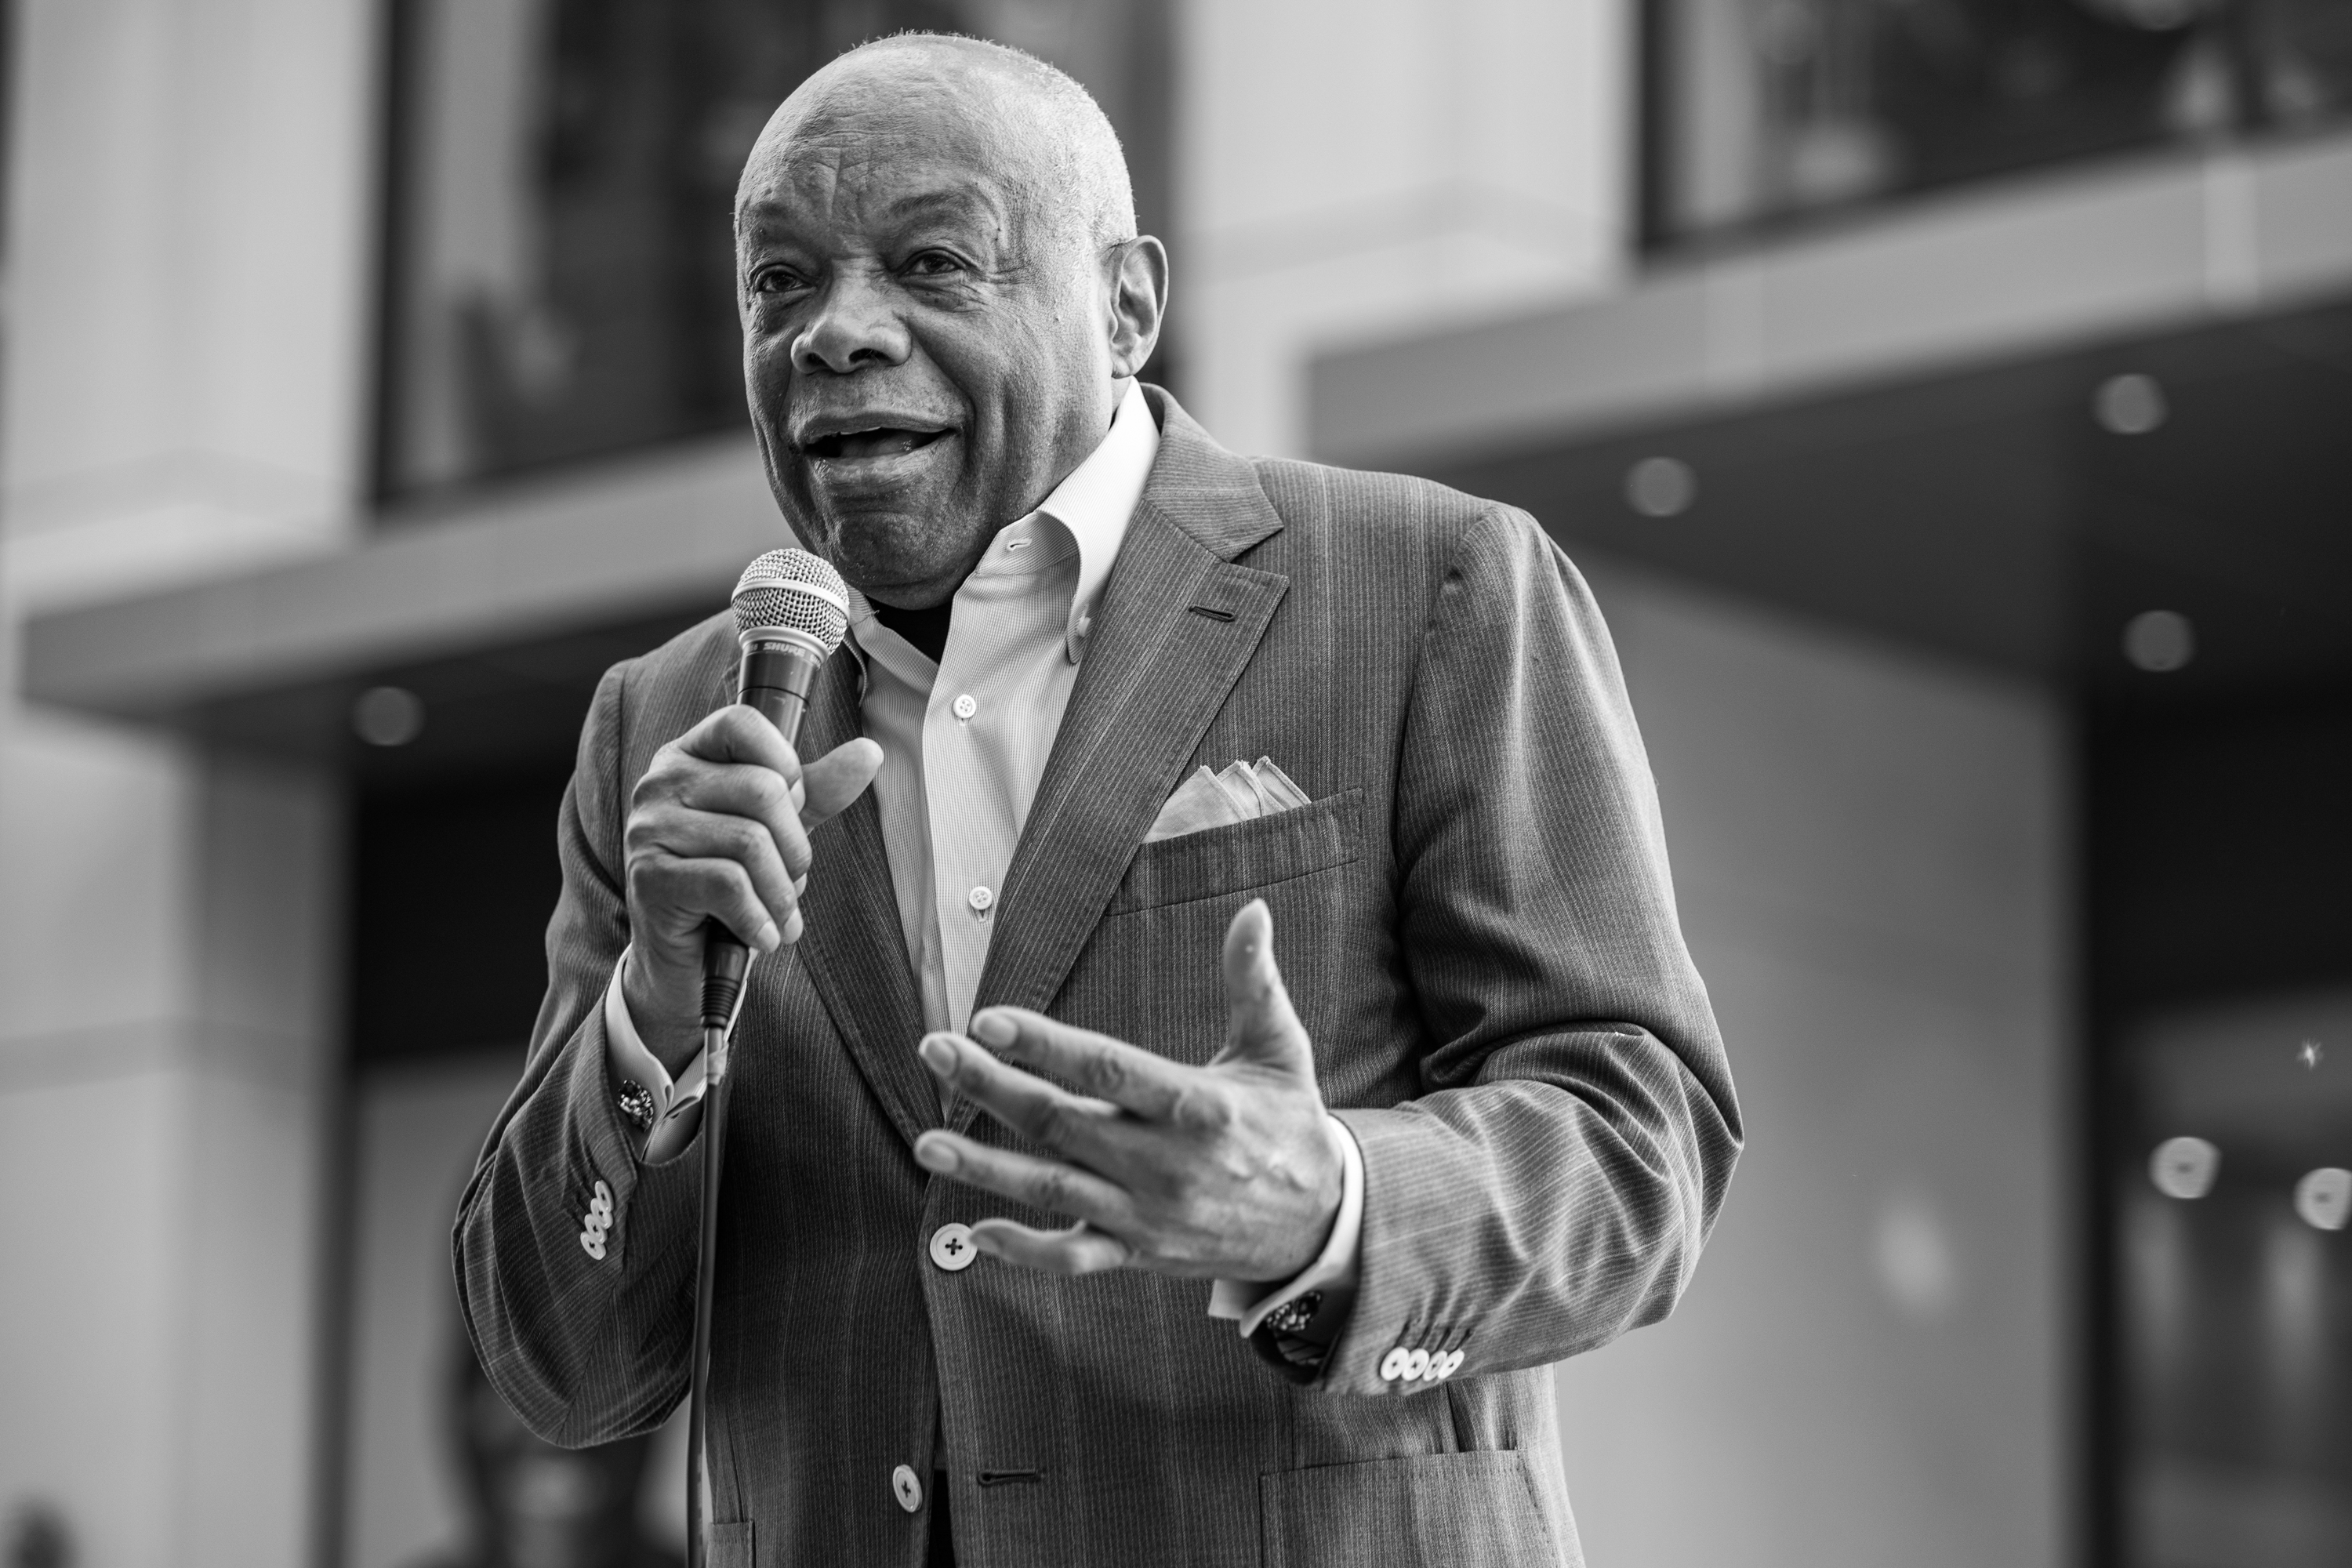 A Black man in a suit speaks into a microphone, gesturing emphatically. The image is black and white.